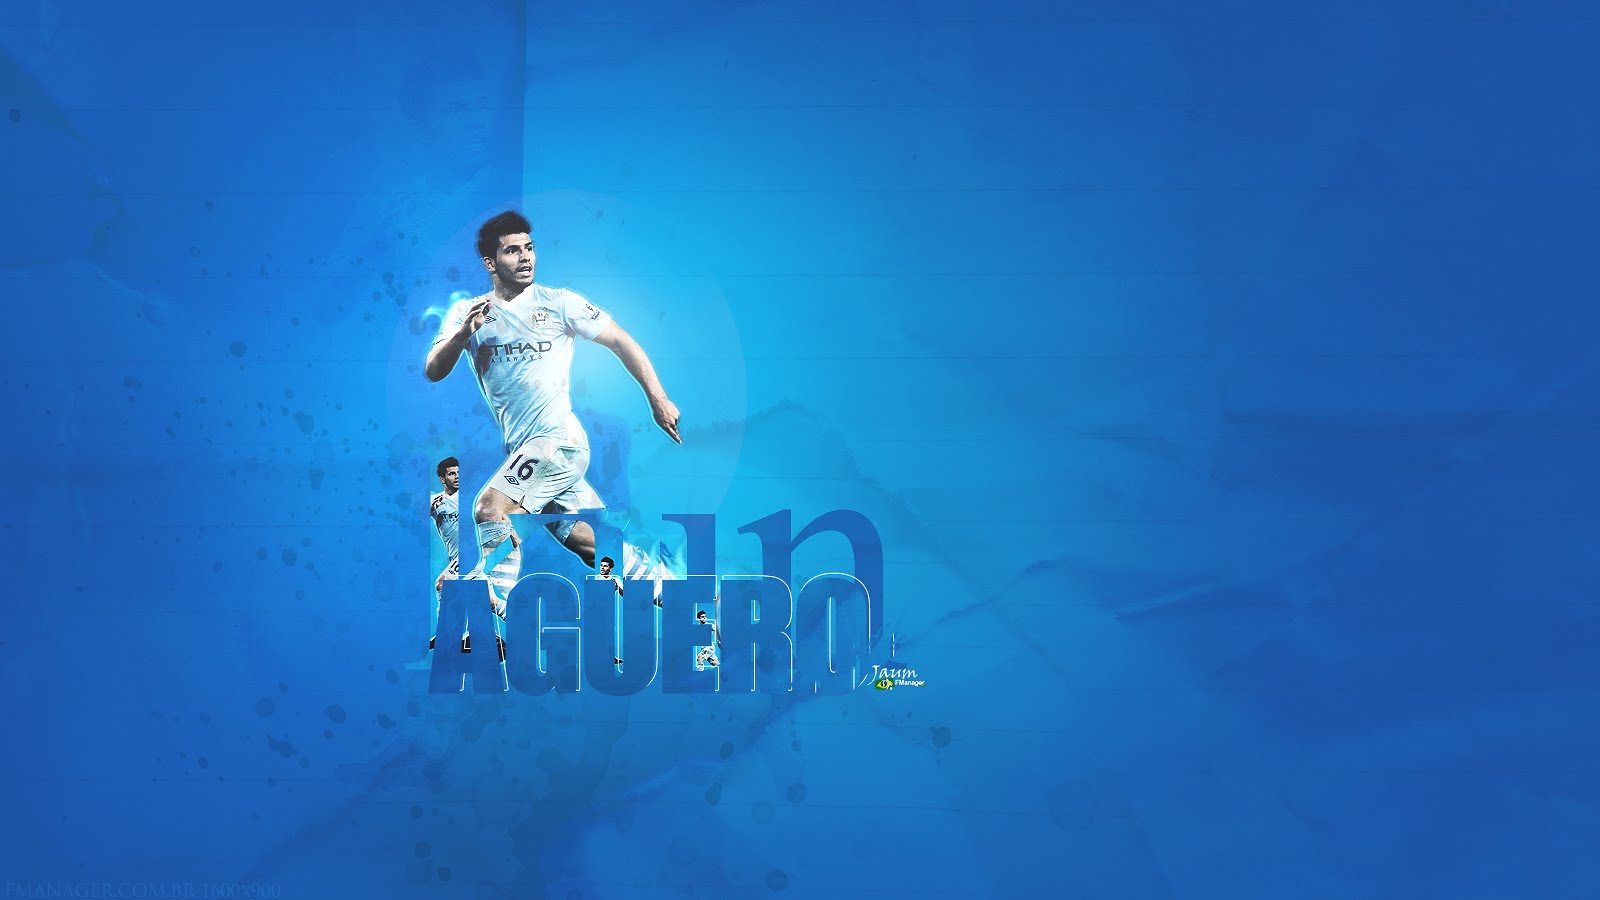 Sergio Aguero Manchester City 2012 | Wallpapers, Photos, Images and Profile